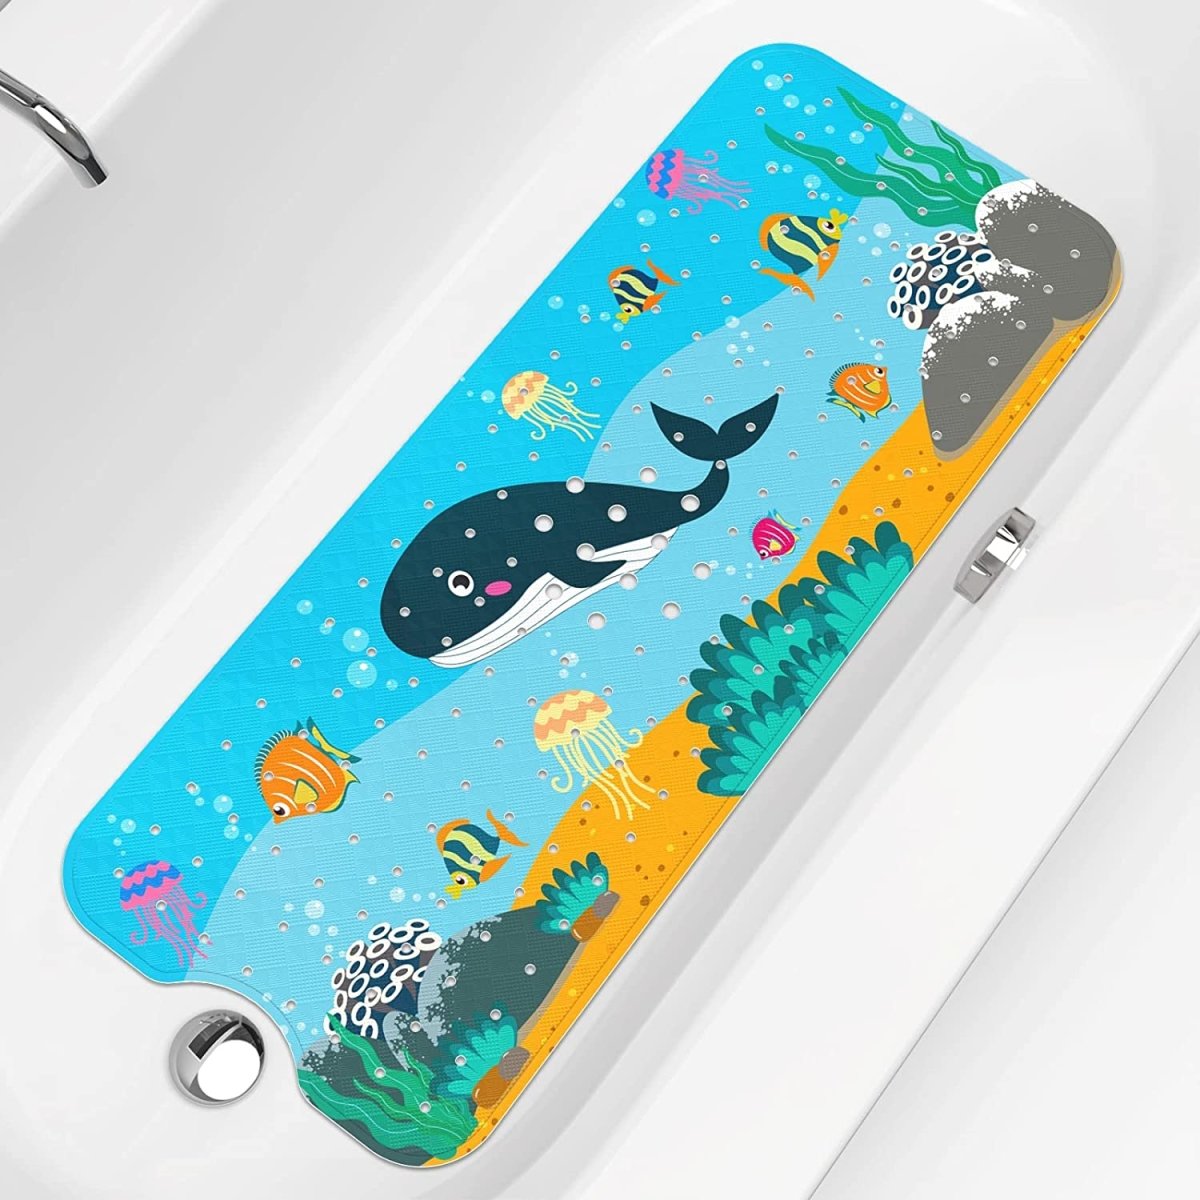 https://cdn.shopify.com/s/files/1/0619/6307/5793/products/baby-bath-mat-non-slip-anti-mould-100x40cm-extra-long-with-suction-cups-and-drain-holes-b09y52q77r-236613.jpg?v=1683321128&width=1200